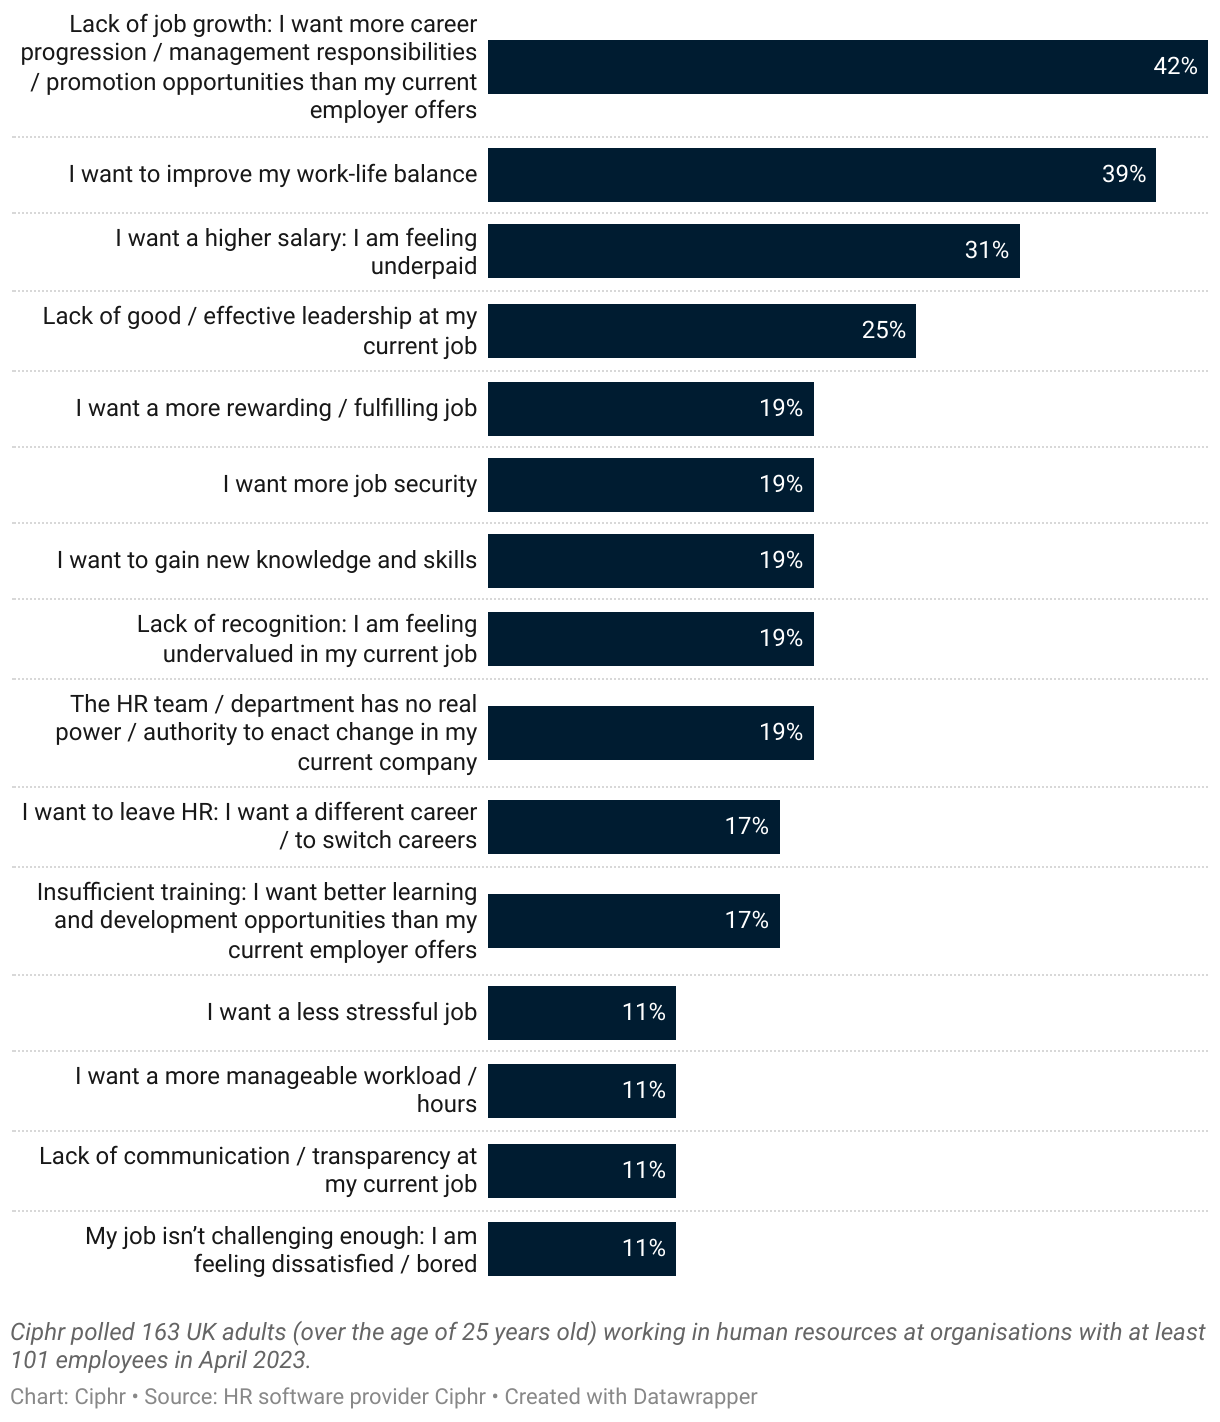 The top 15 reasons why HR professionals want to leave their jobs, segmented by age